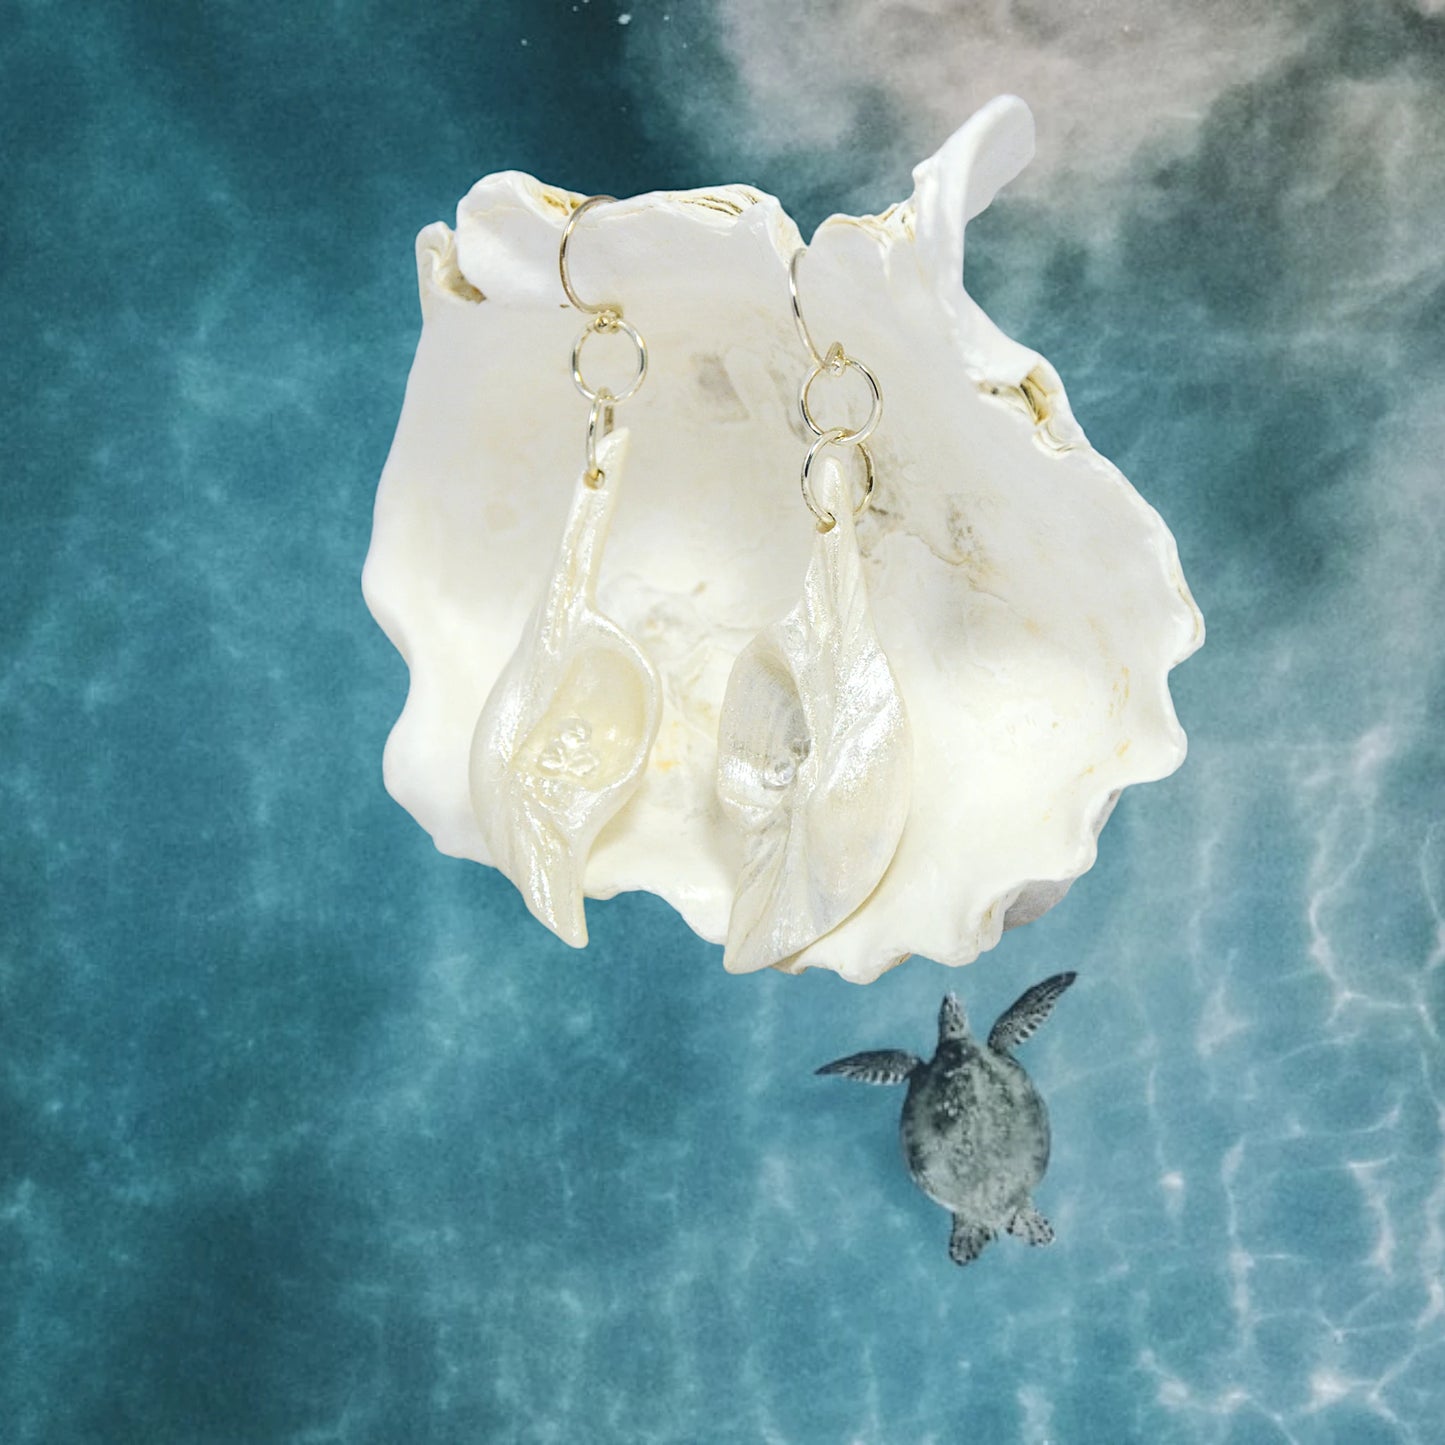 Dream Stone natural seashell earrings with herkimer diamonds. The earrings are shown hanging from a larger seashell and the ocean background has a turtle swimming in it.